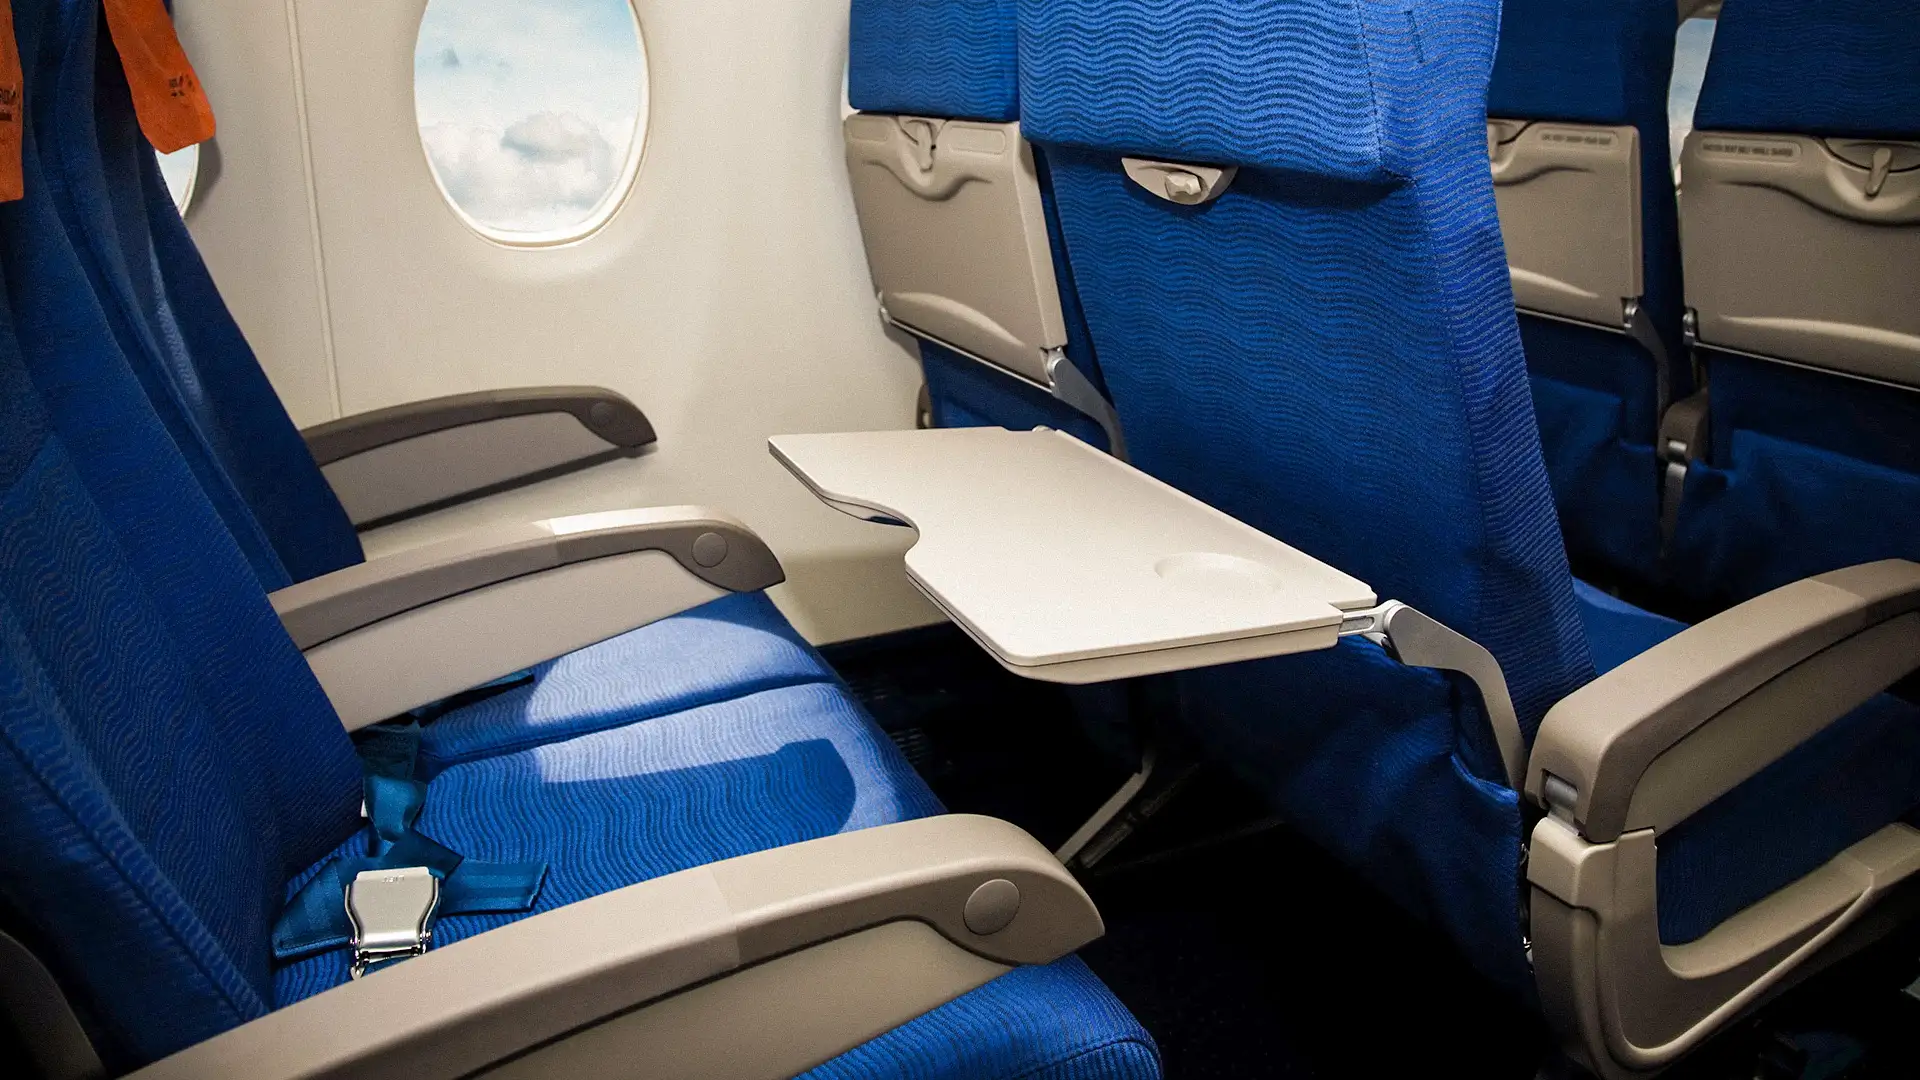 Why You Should Never Use Your Seat-back Pocket on a Plane